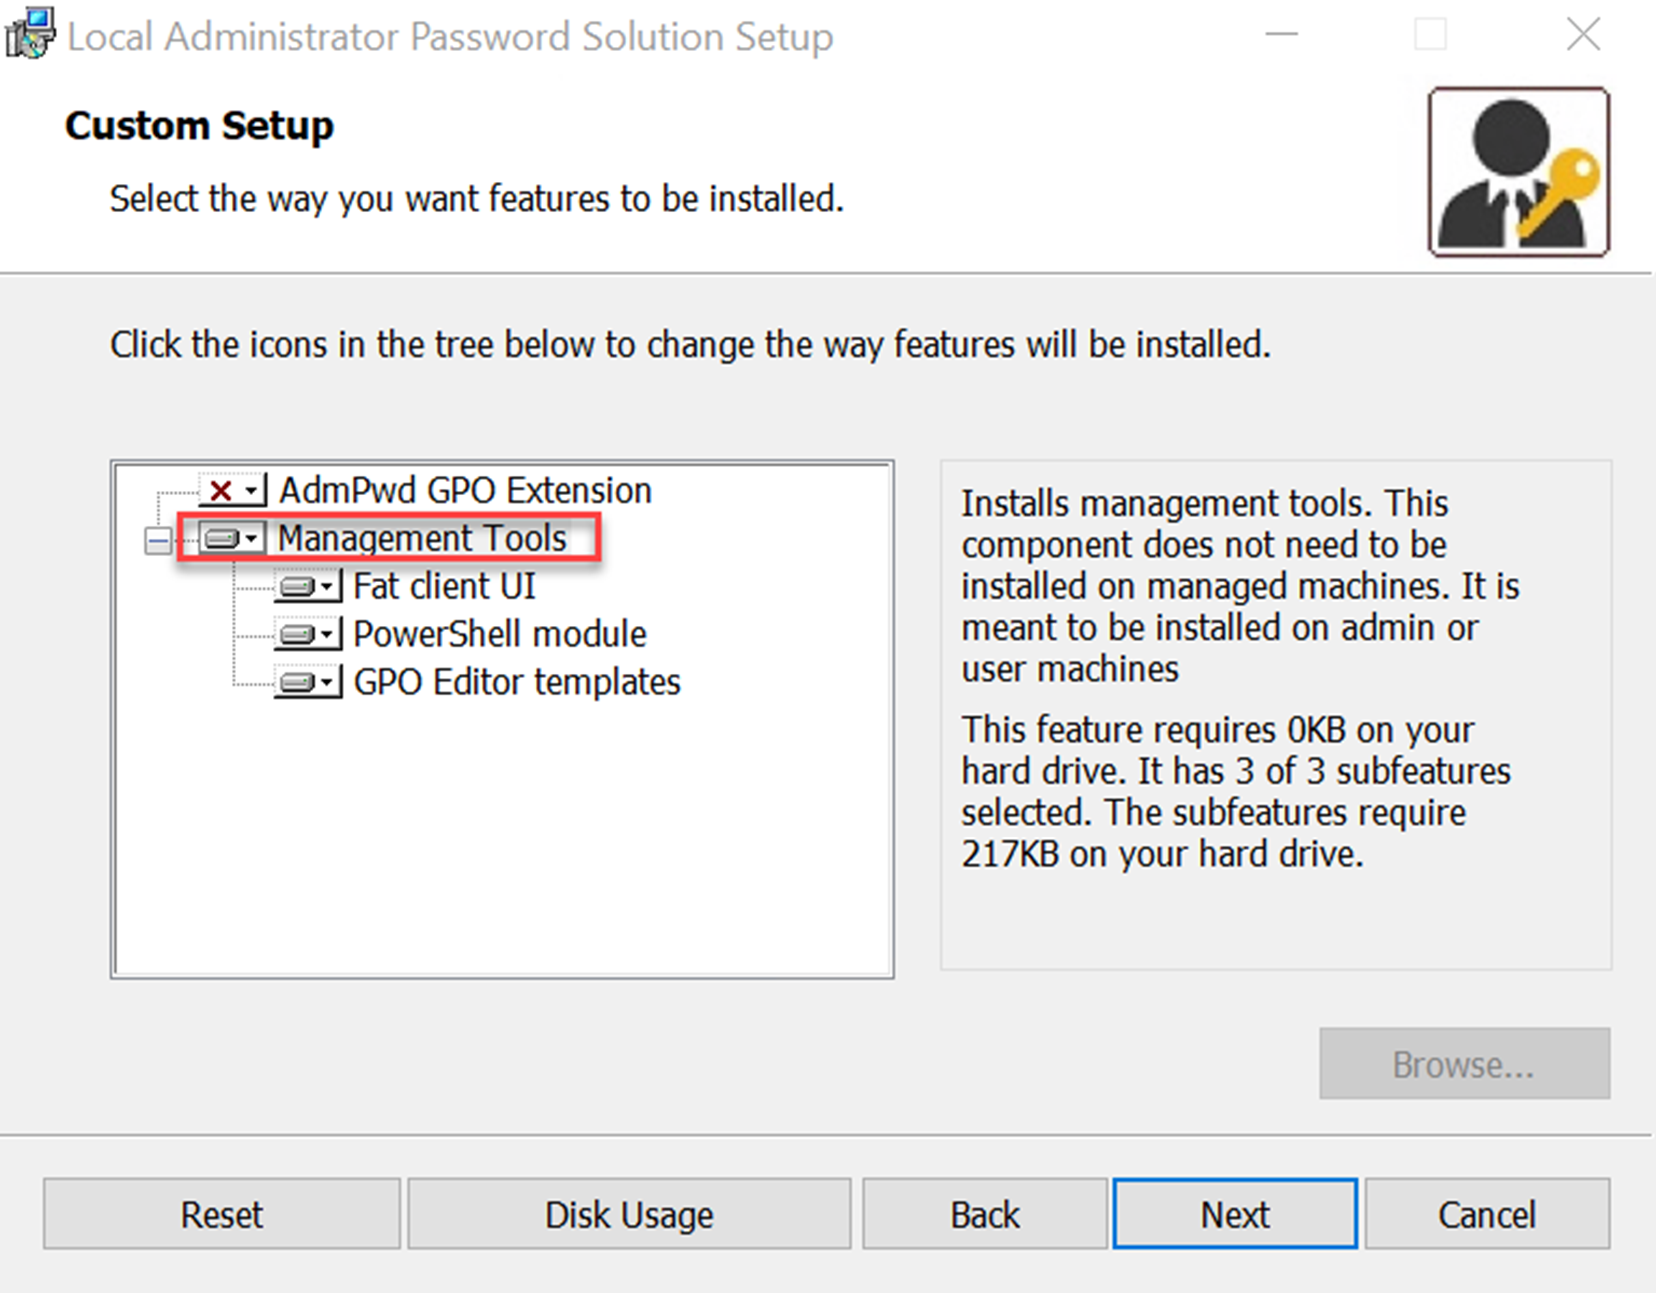 How to Configure Microsoft Local Administrator Password Solution (LAPS)